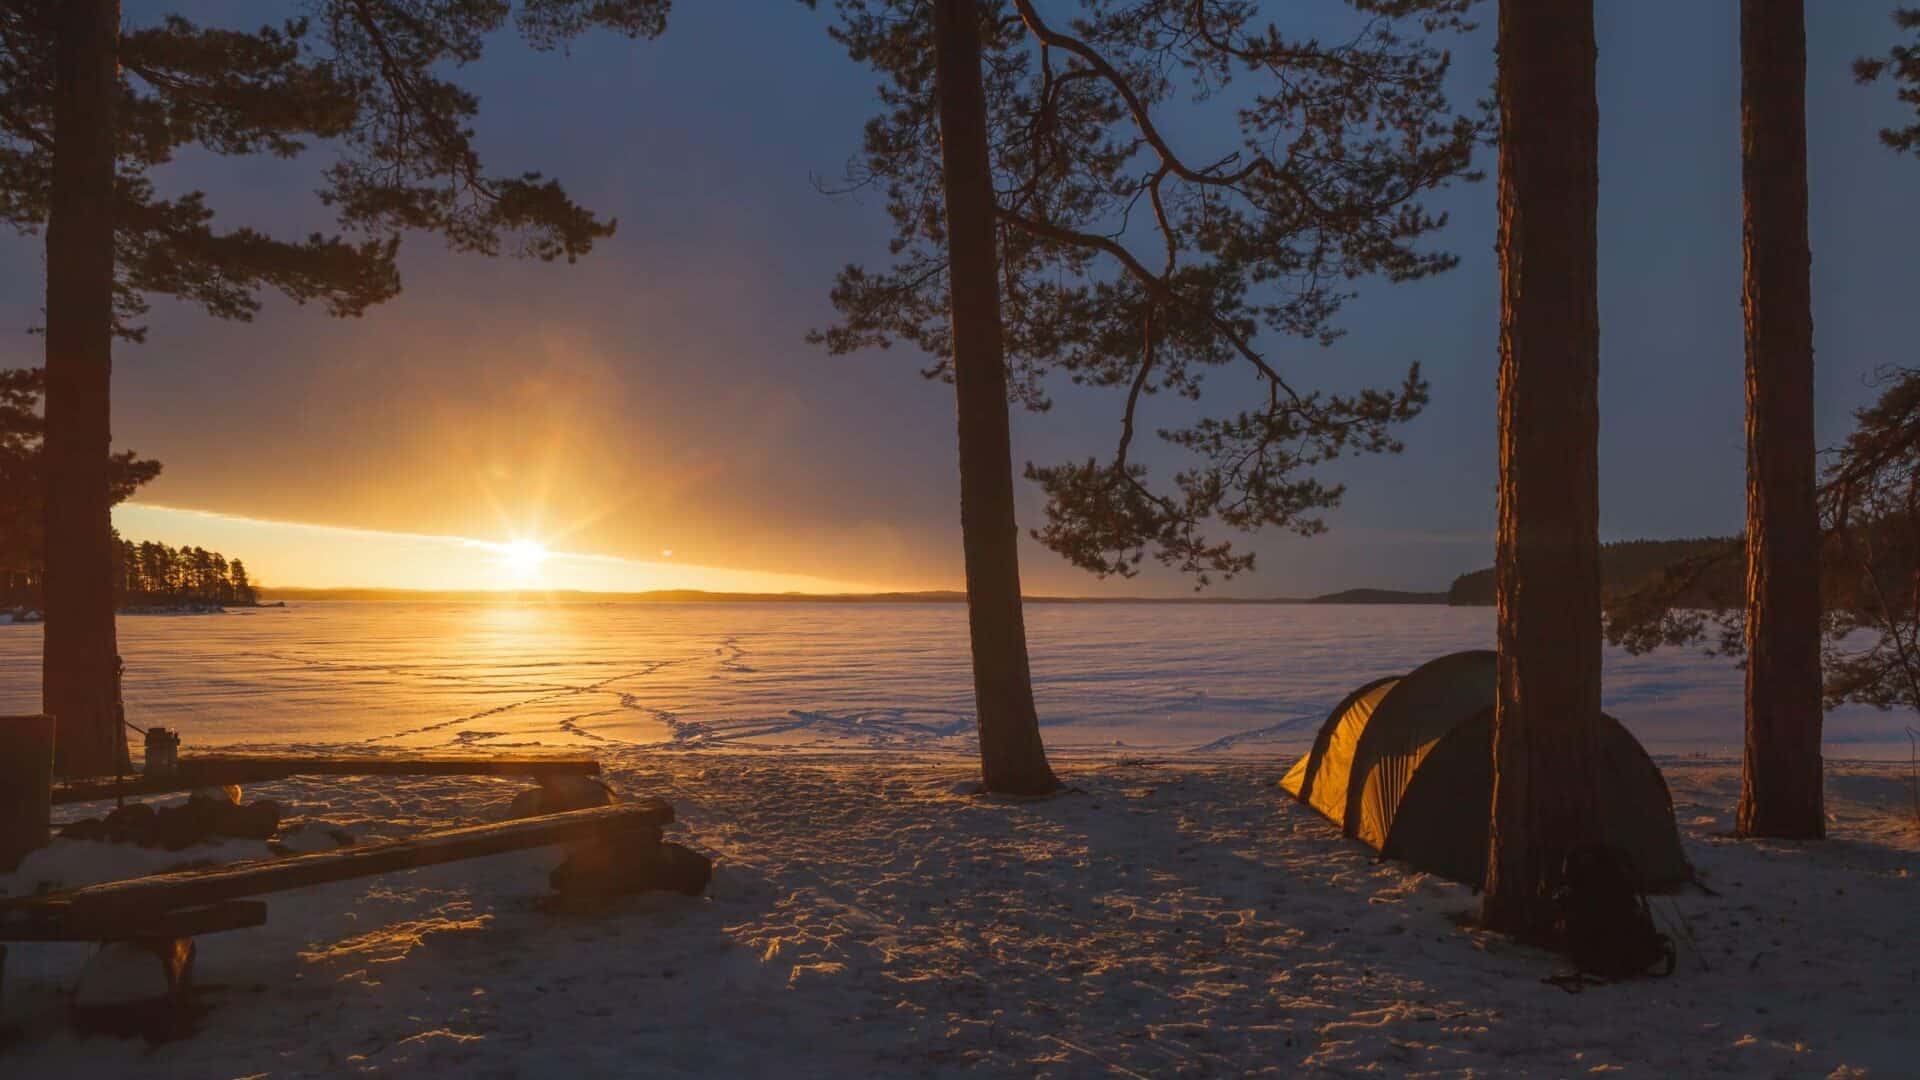 Sunset on an icy lake. In the foreground of the picture is a tent and pine trees.